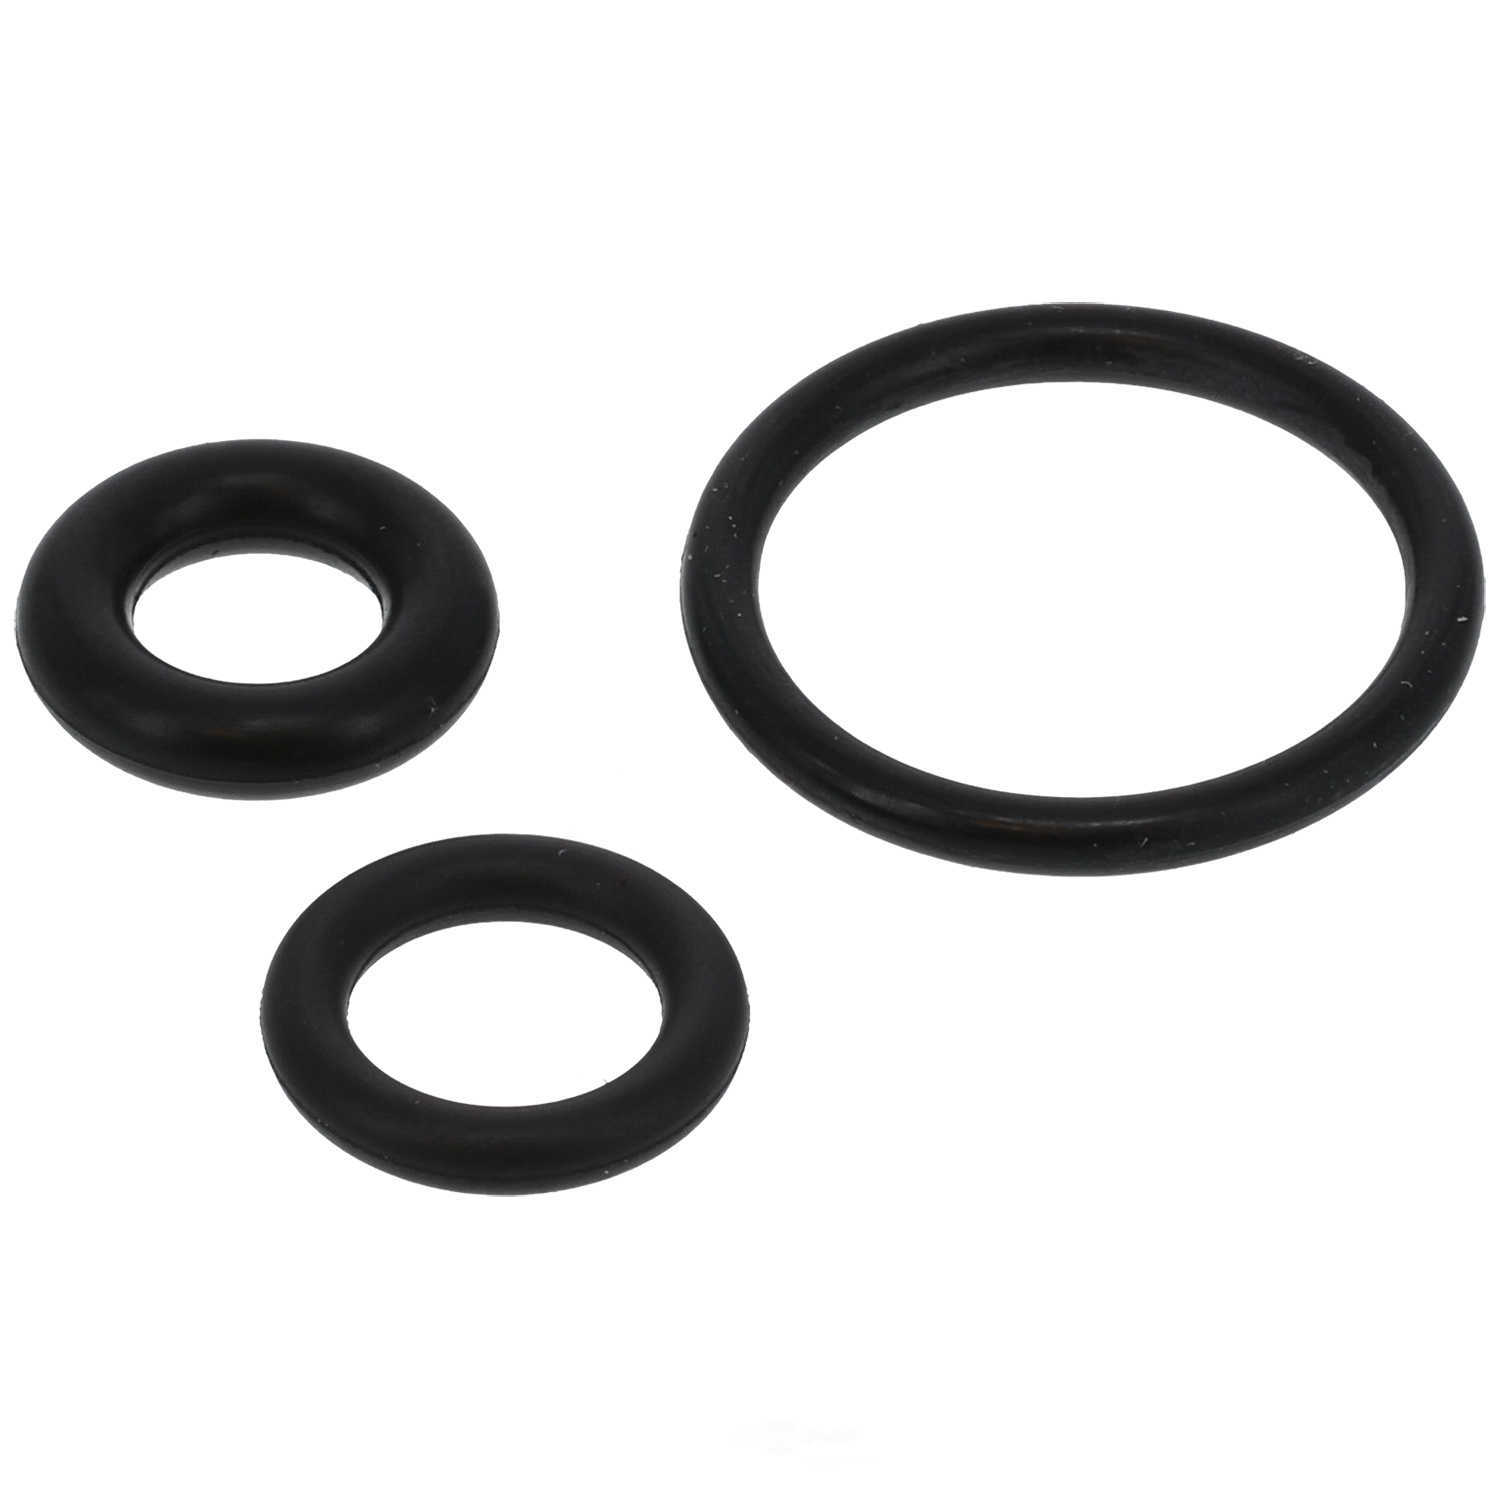 GB REMANUFACTURING INC. - Fuel Injector Seal Kit - GBR 8-043